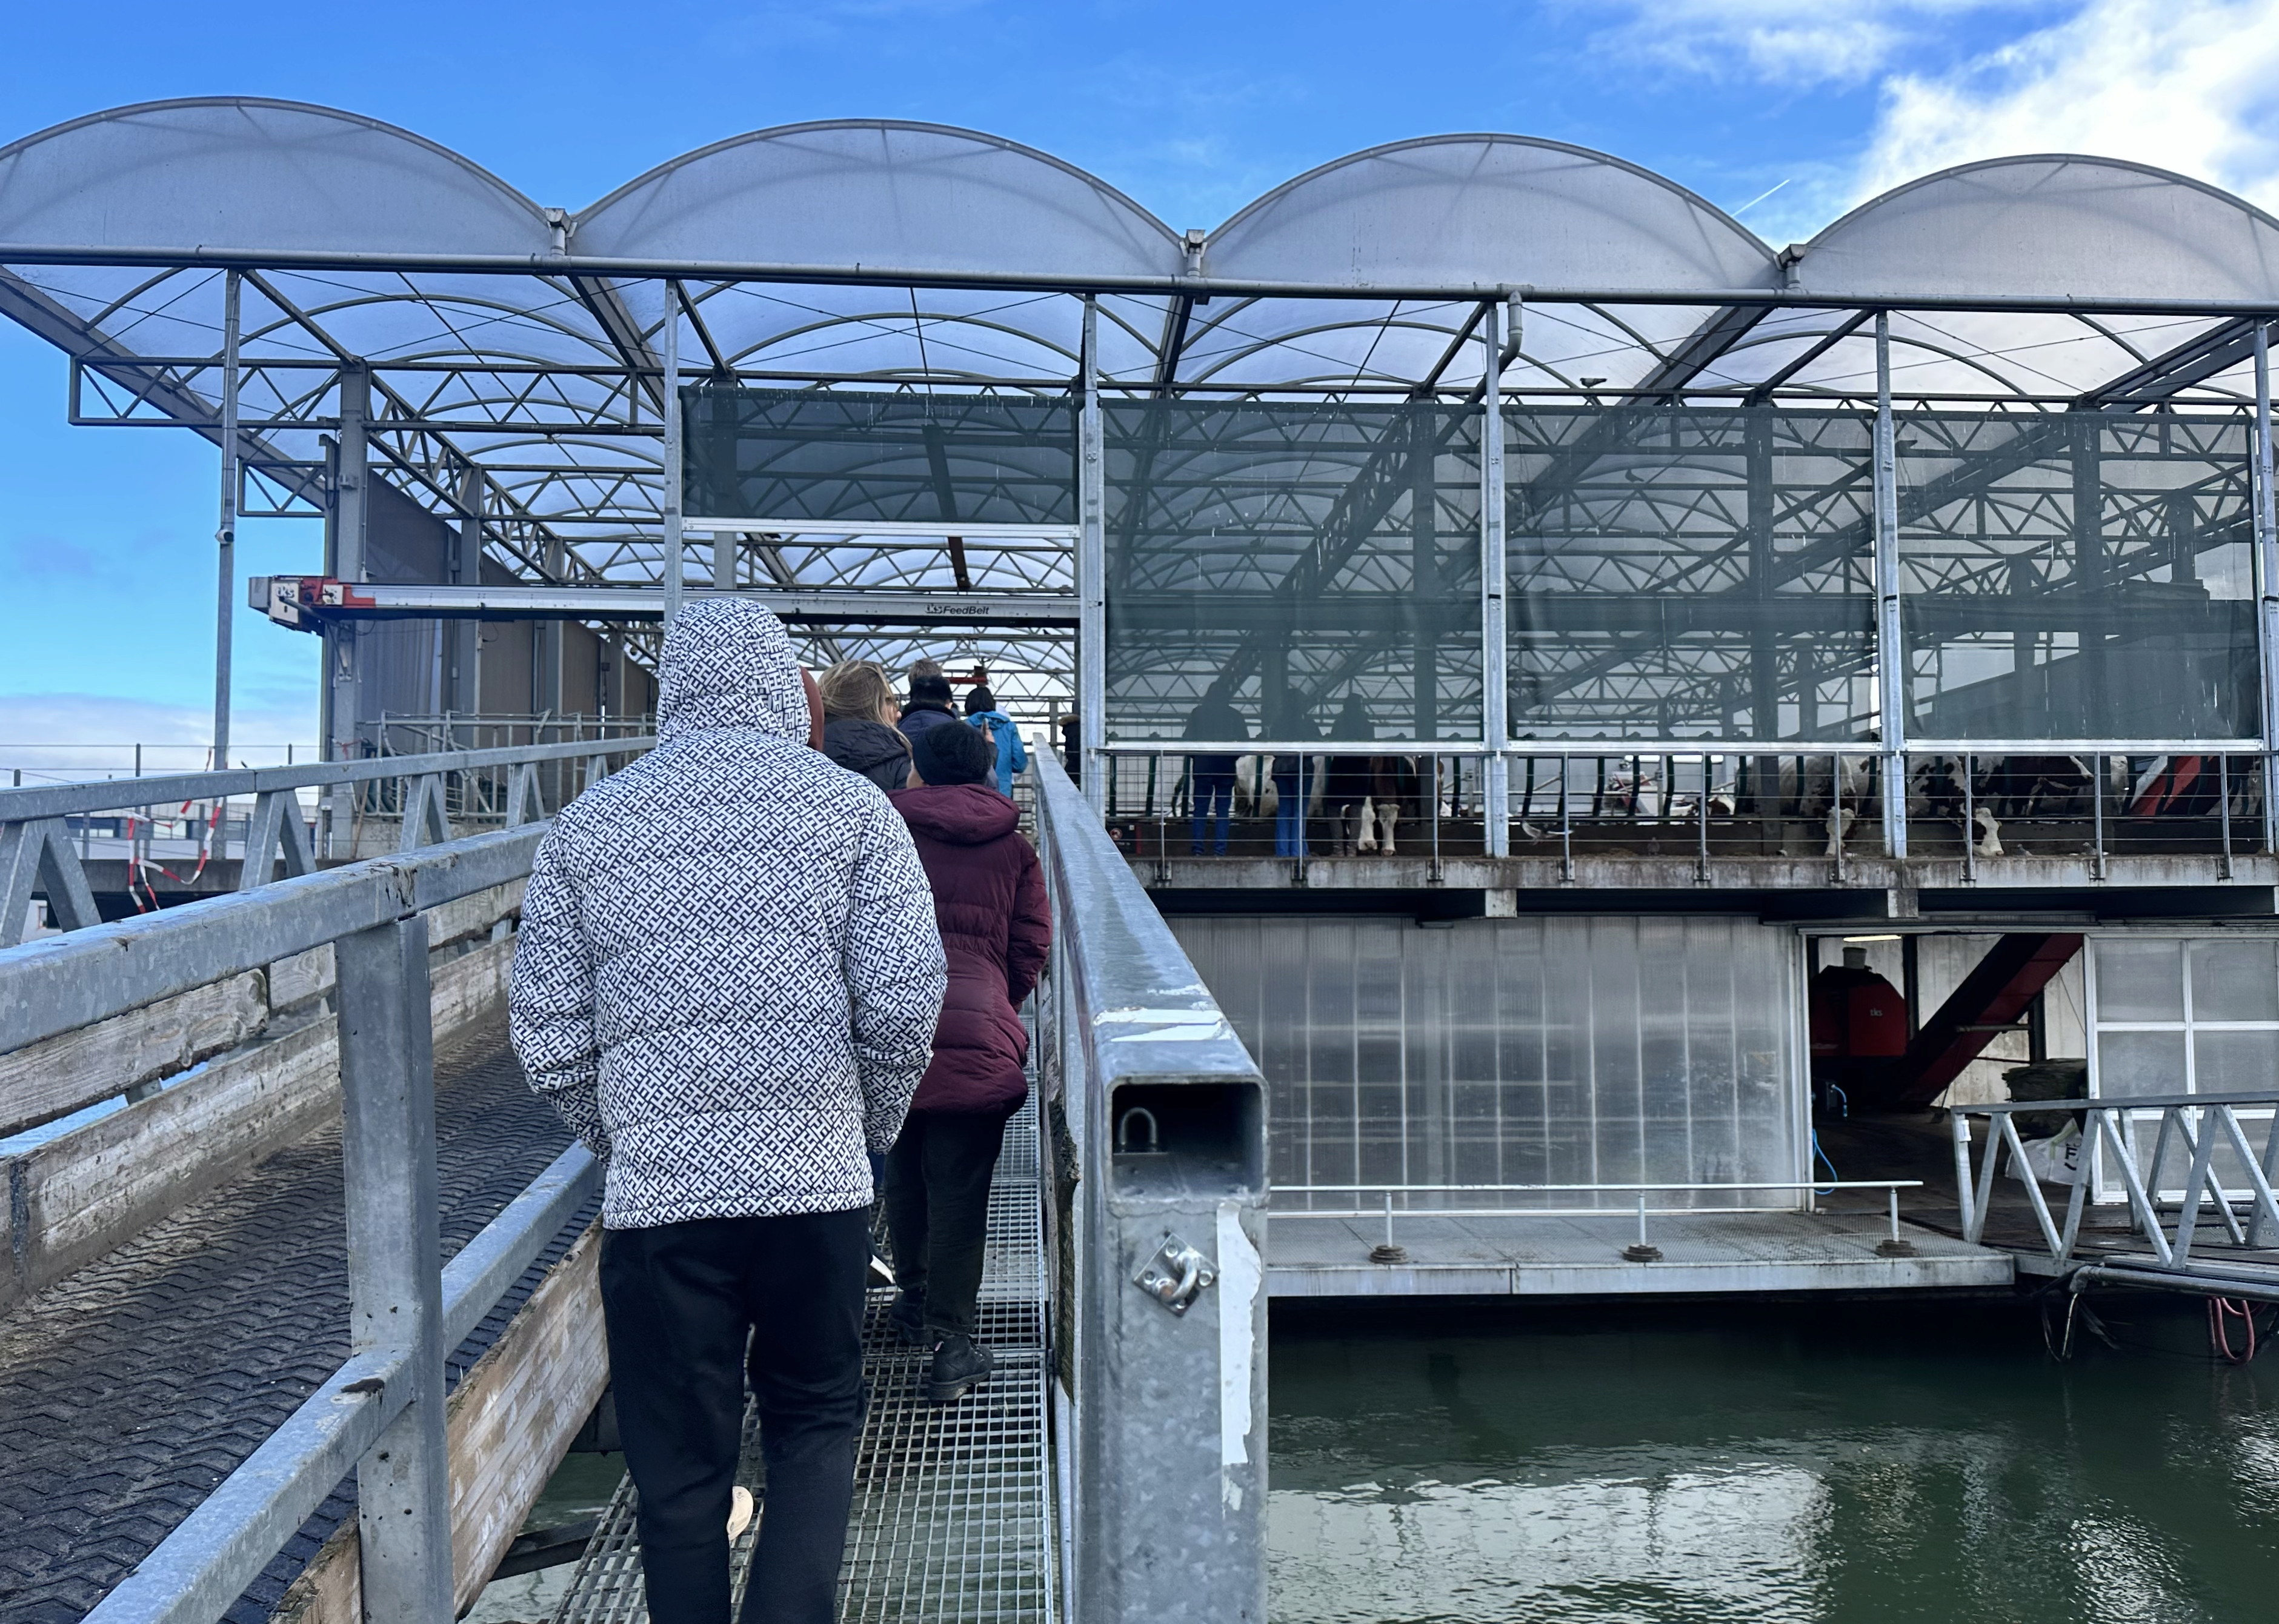 Image of students in winter coats walking over a bridge to reach Rotterdam’s Floating Farm